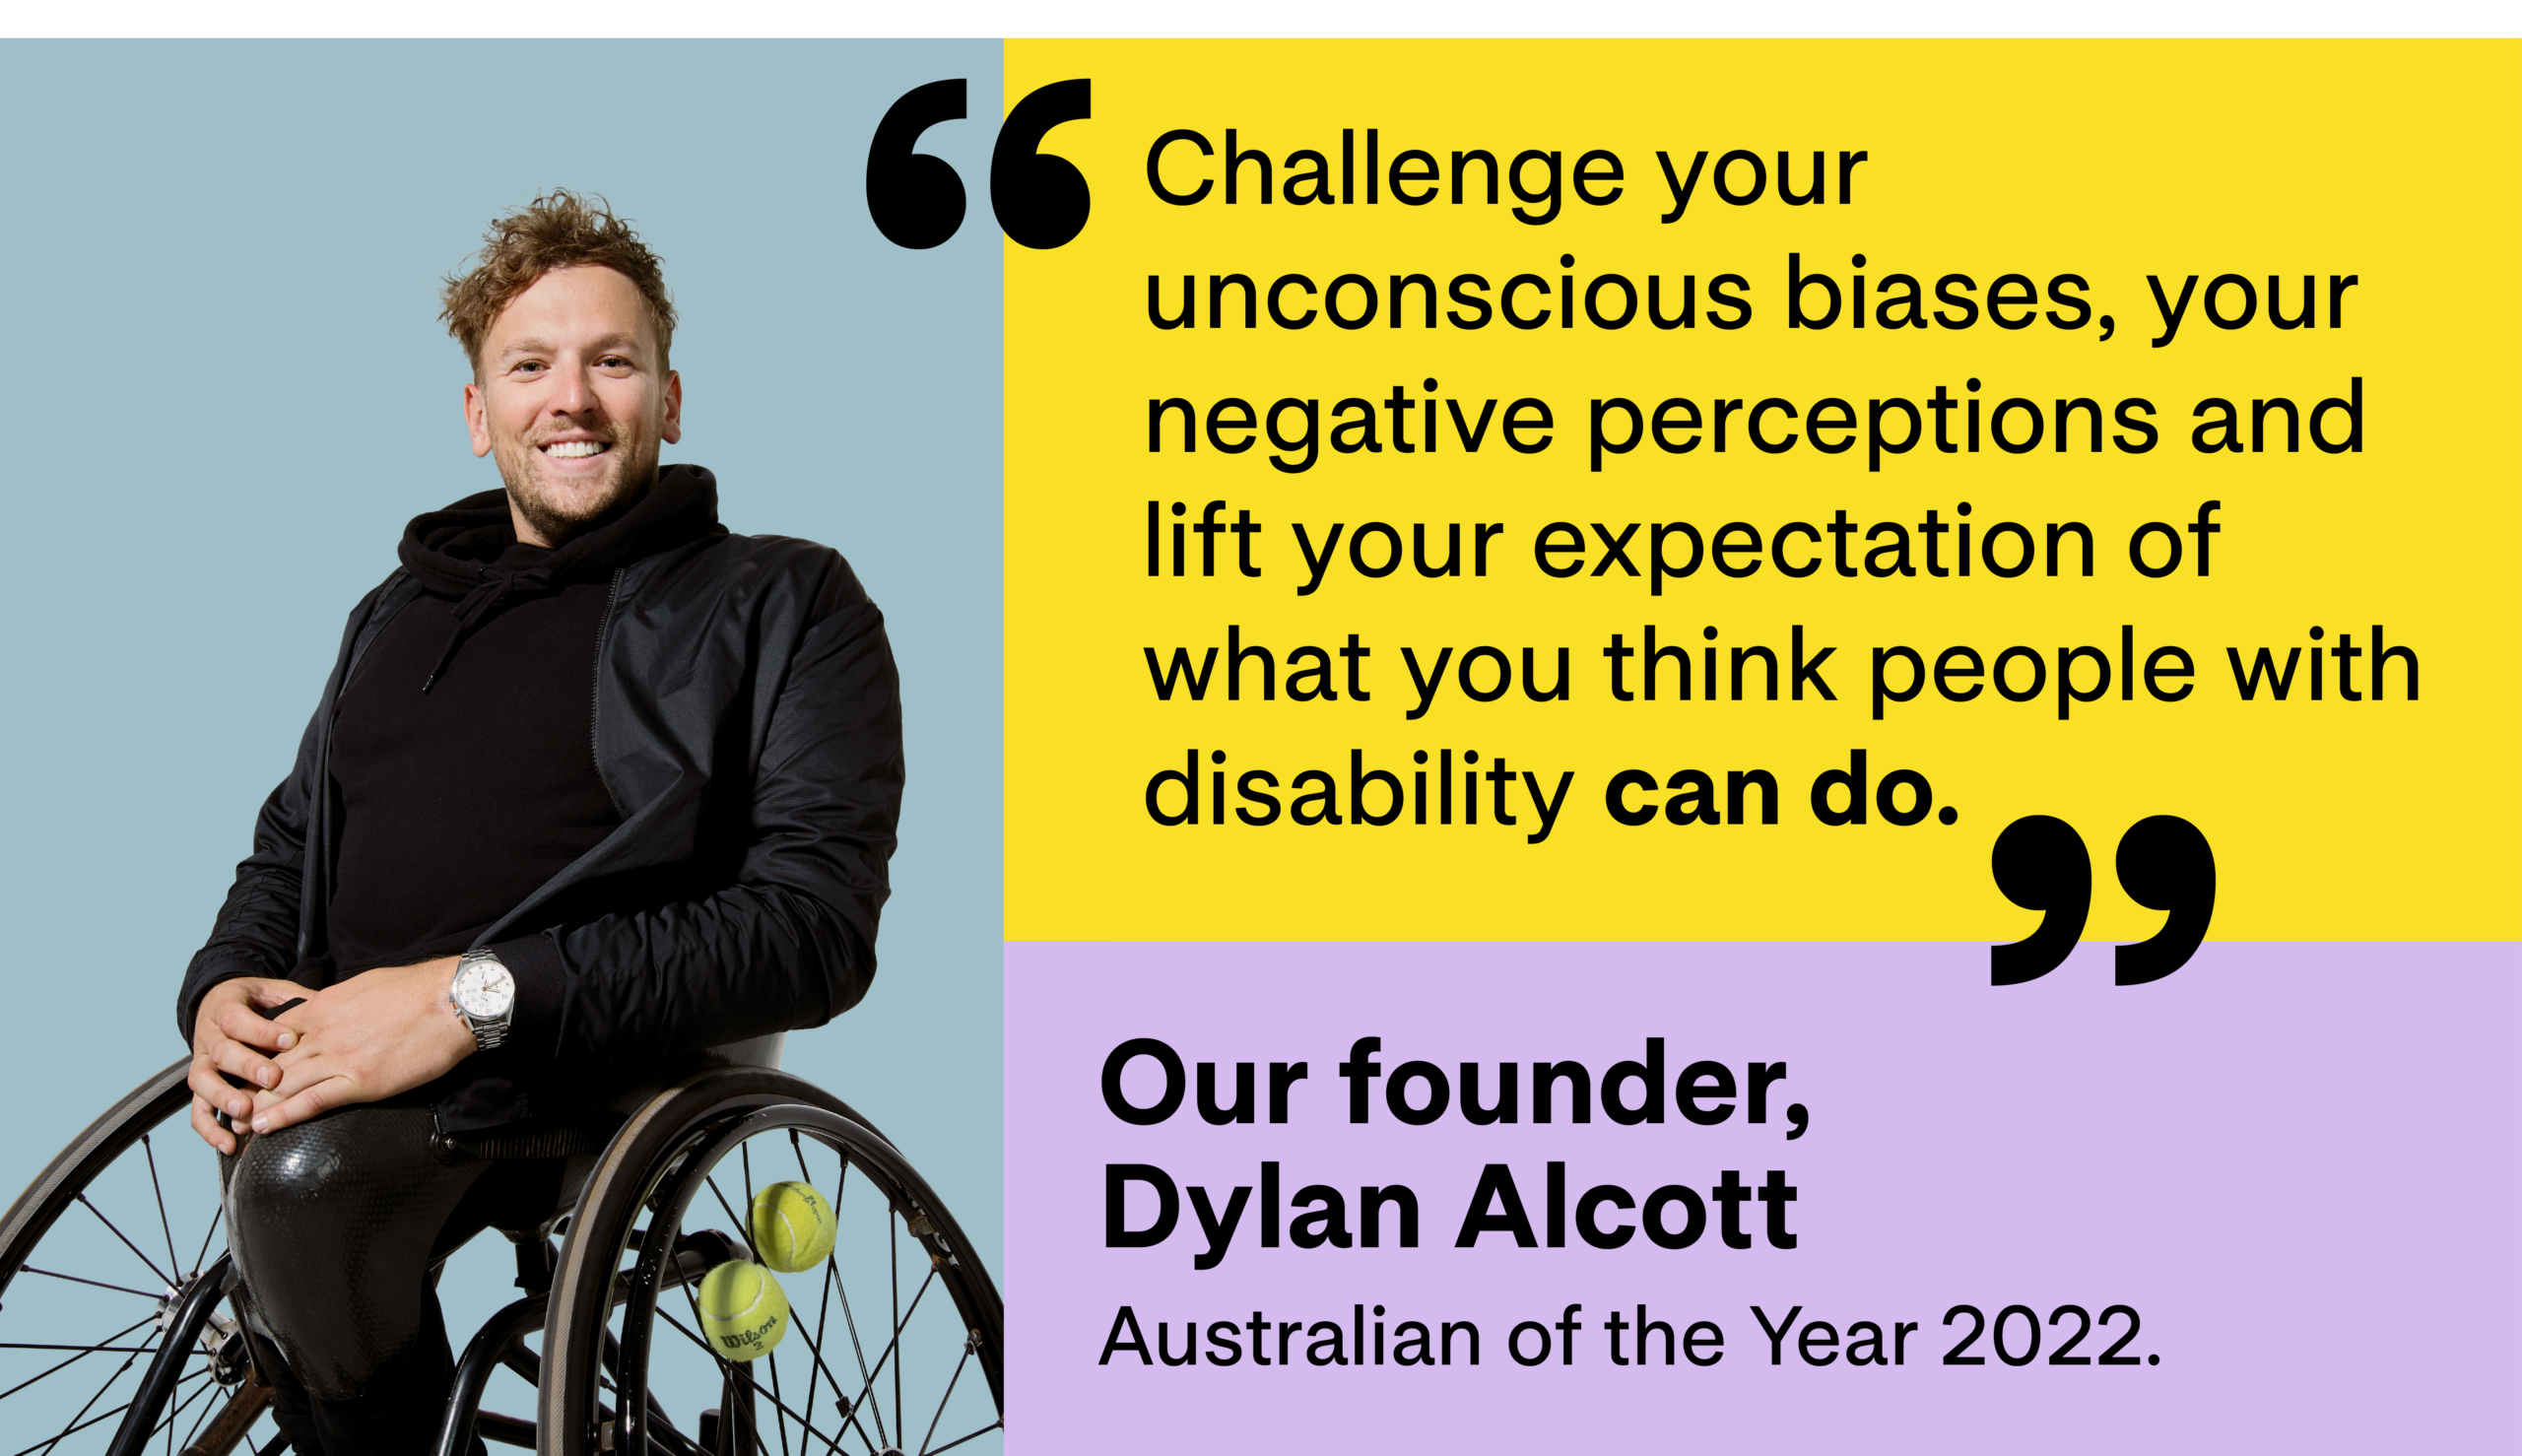 Dylan Alcott wearing all black in his wheelchair smiling at the camera. Big bold text to the right says "Challenge your unconscious bias, negative perceptions and lift your expectations on what you think people with disability can do. Our founder, Dylan Alcott Australian of the year 2022."